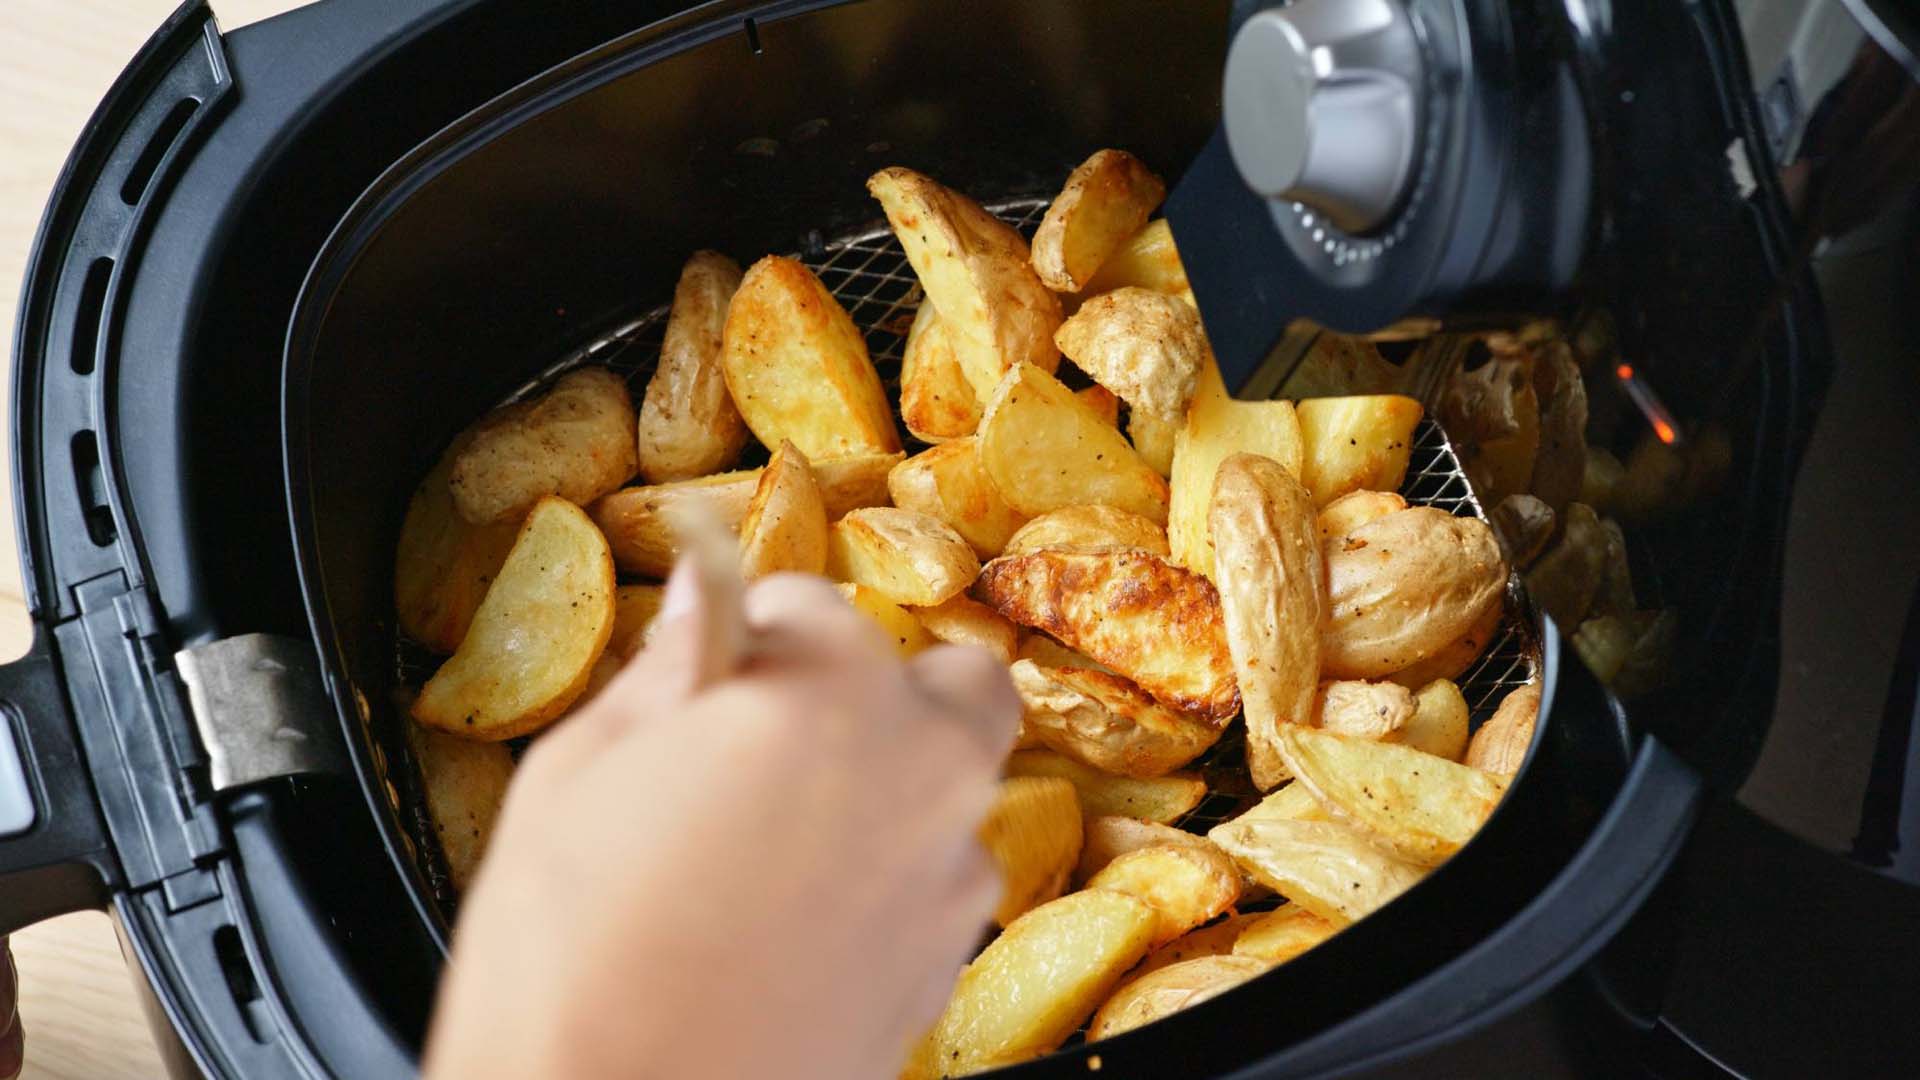 Chips in an airfryer